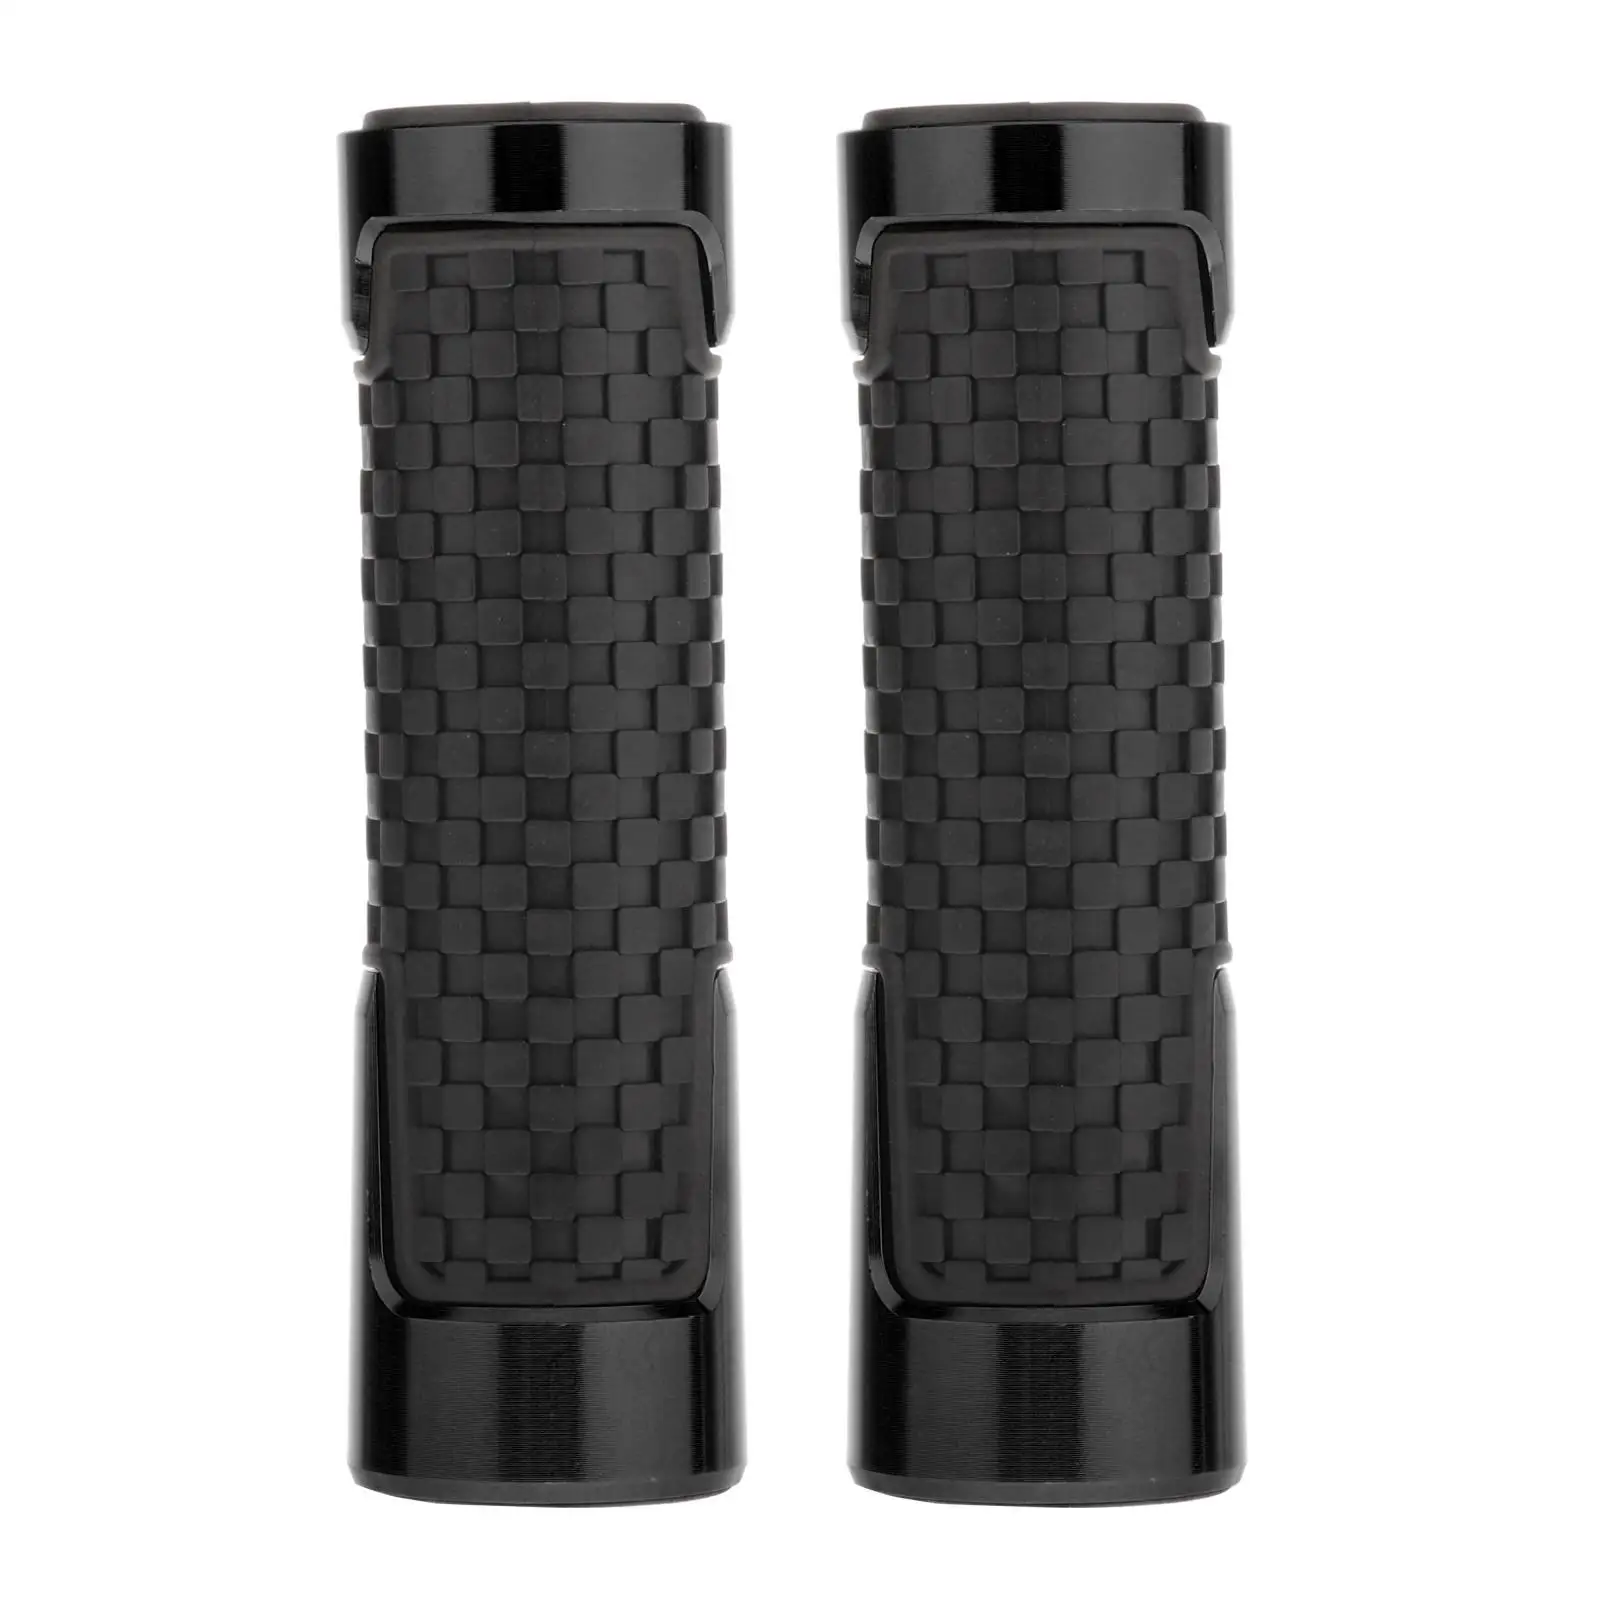 1Pair Motorcycle Handlebar Grips Replacements Easy and Convenient to Install and Use